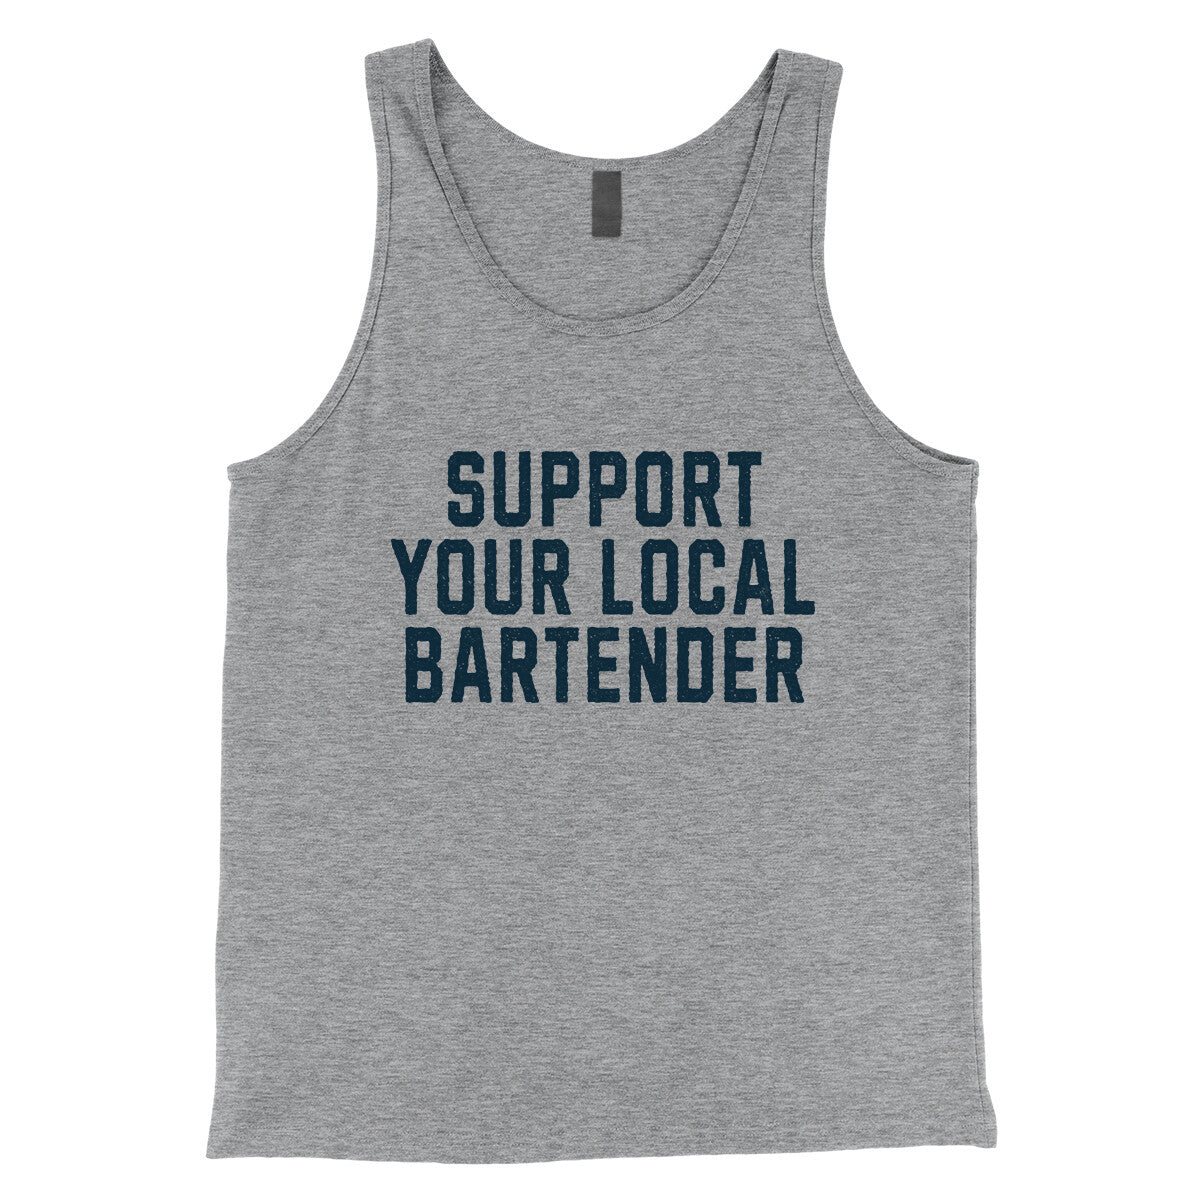 Support your Local Bartender in Athletic Heather Color